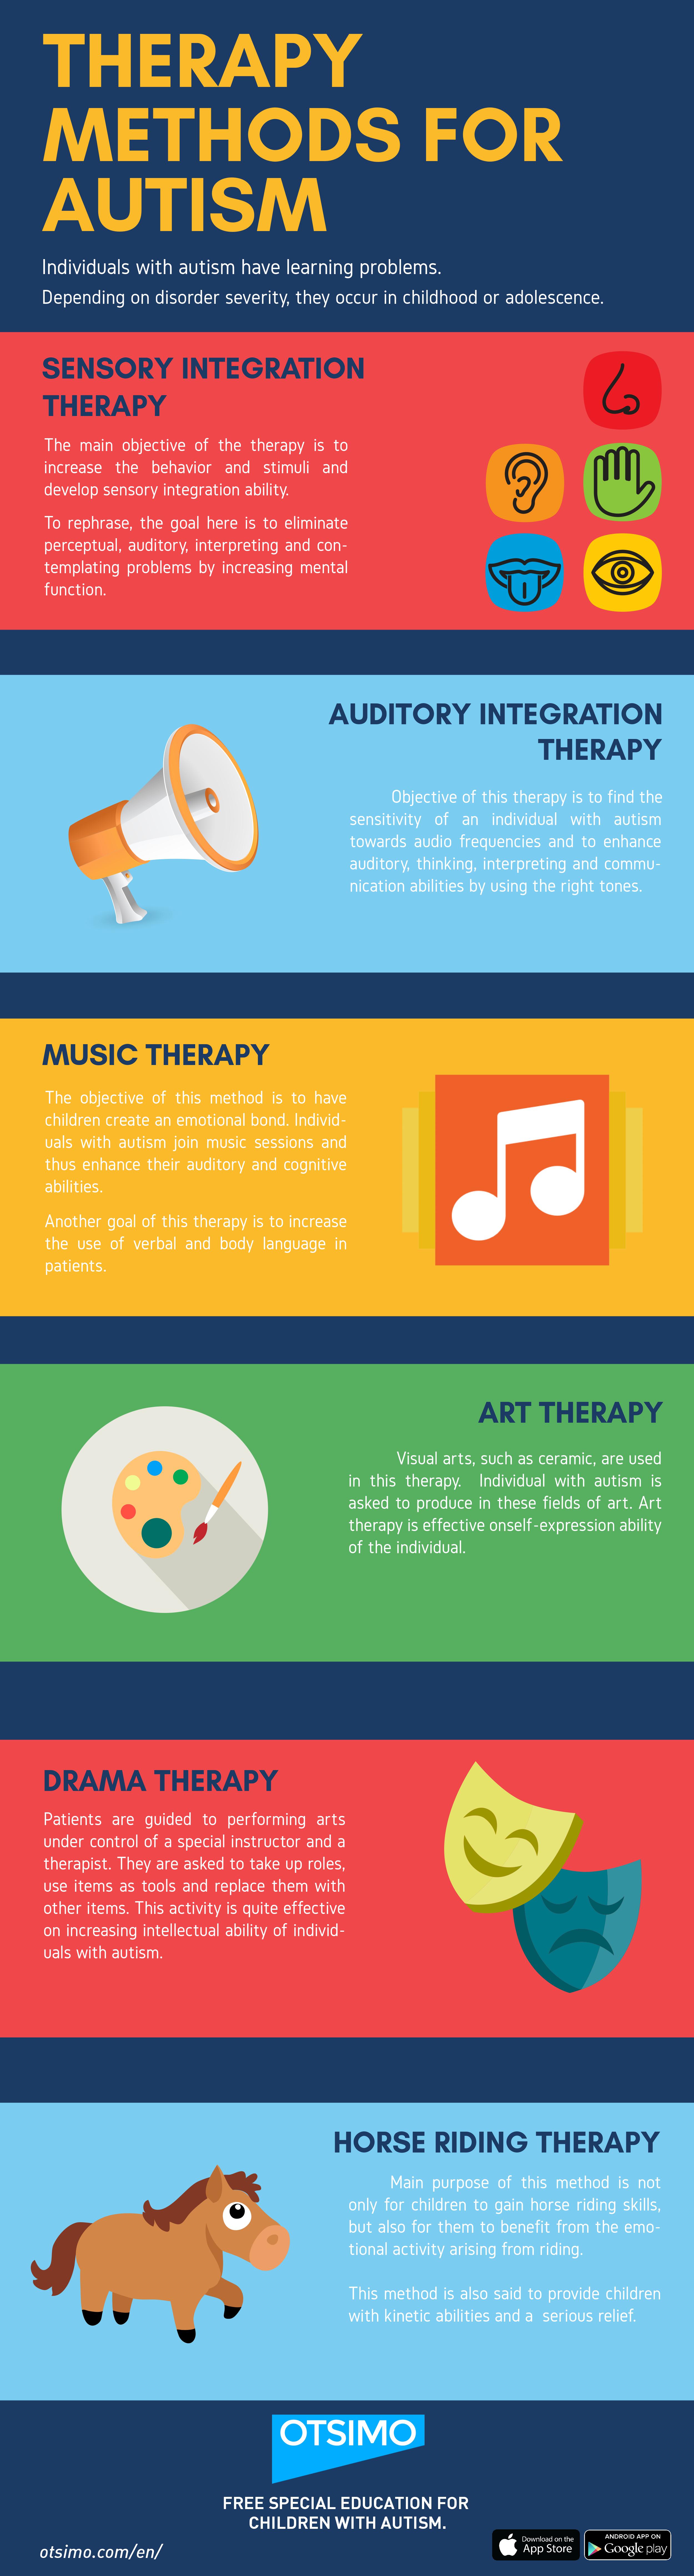 therapy methods for autism